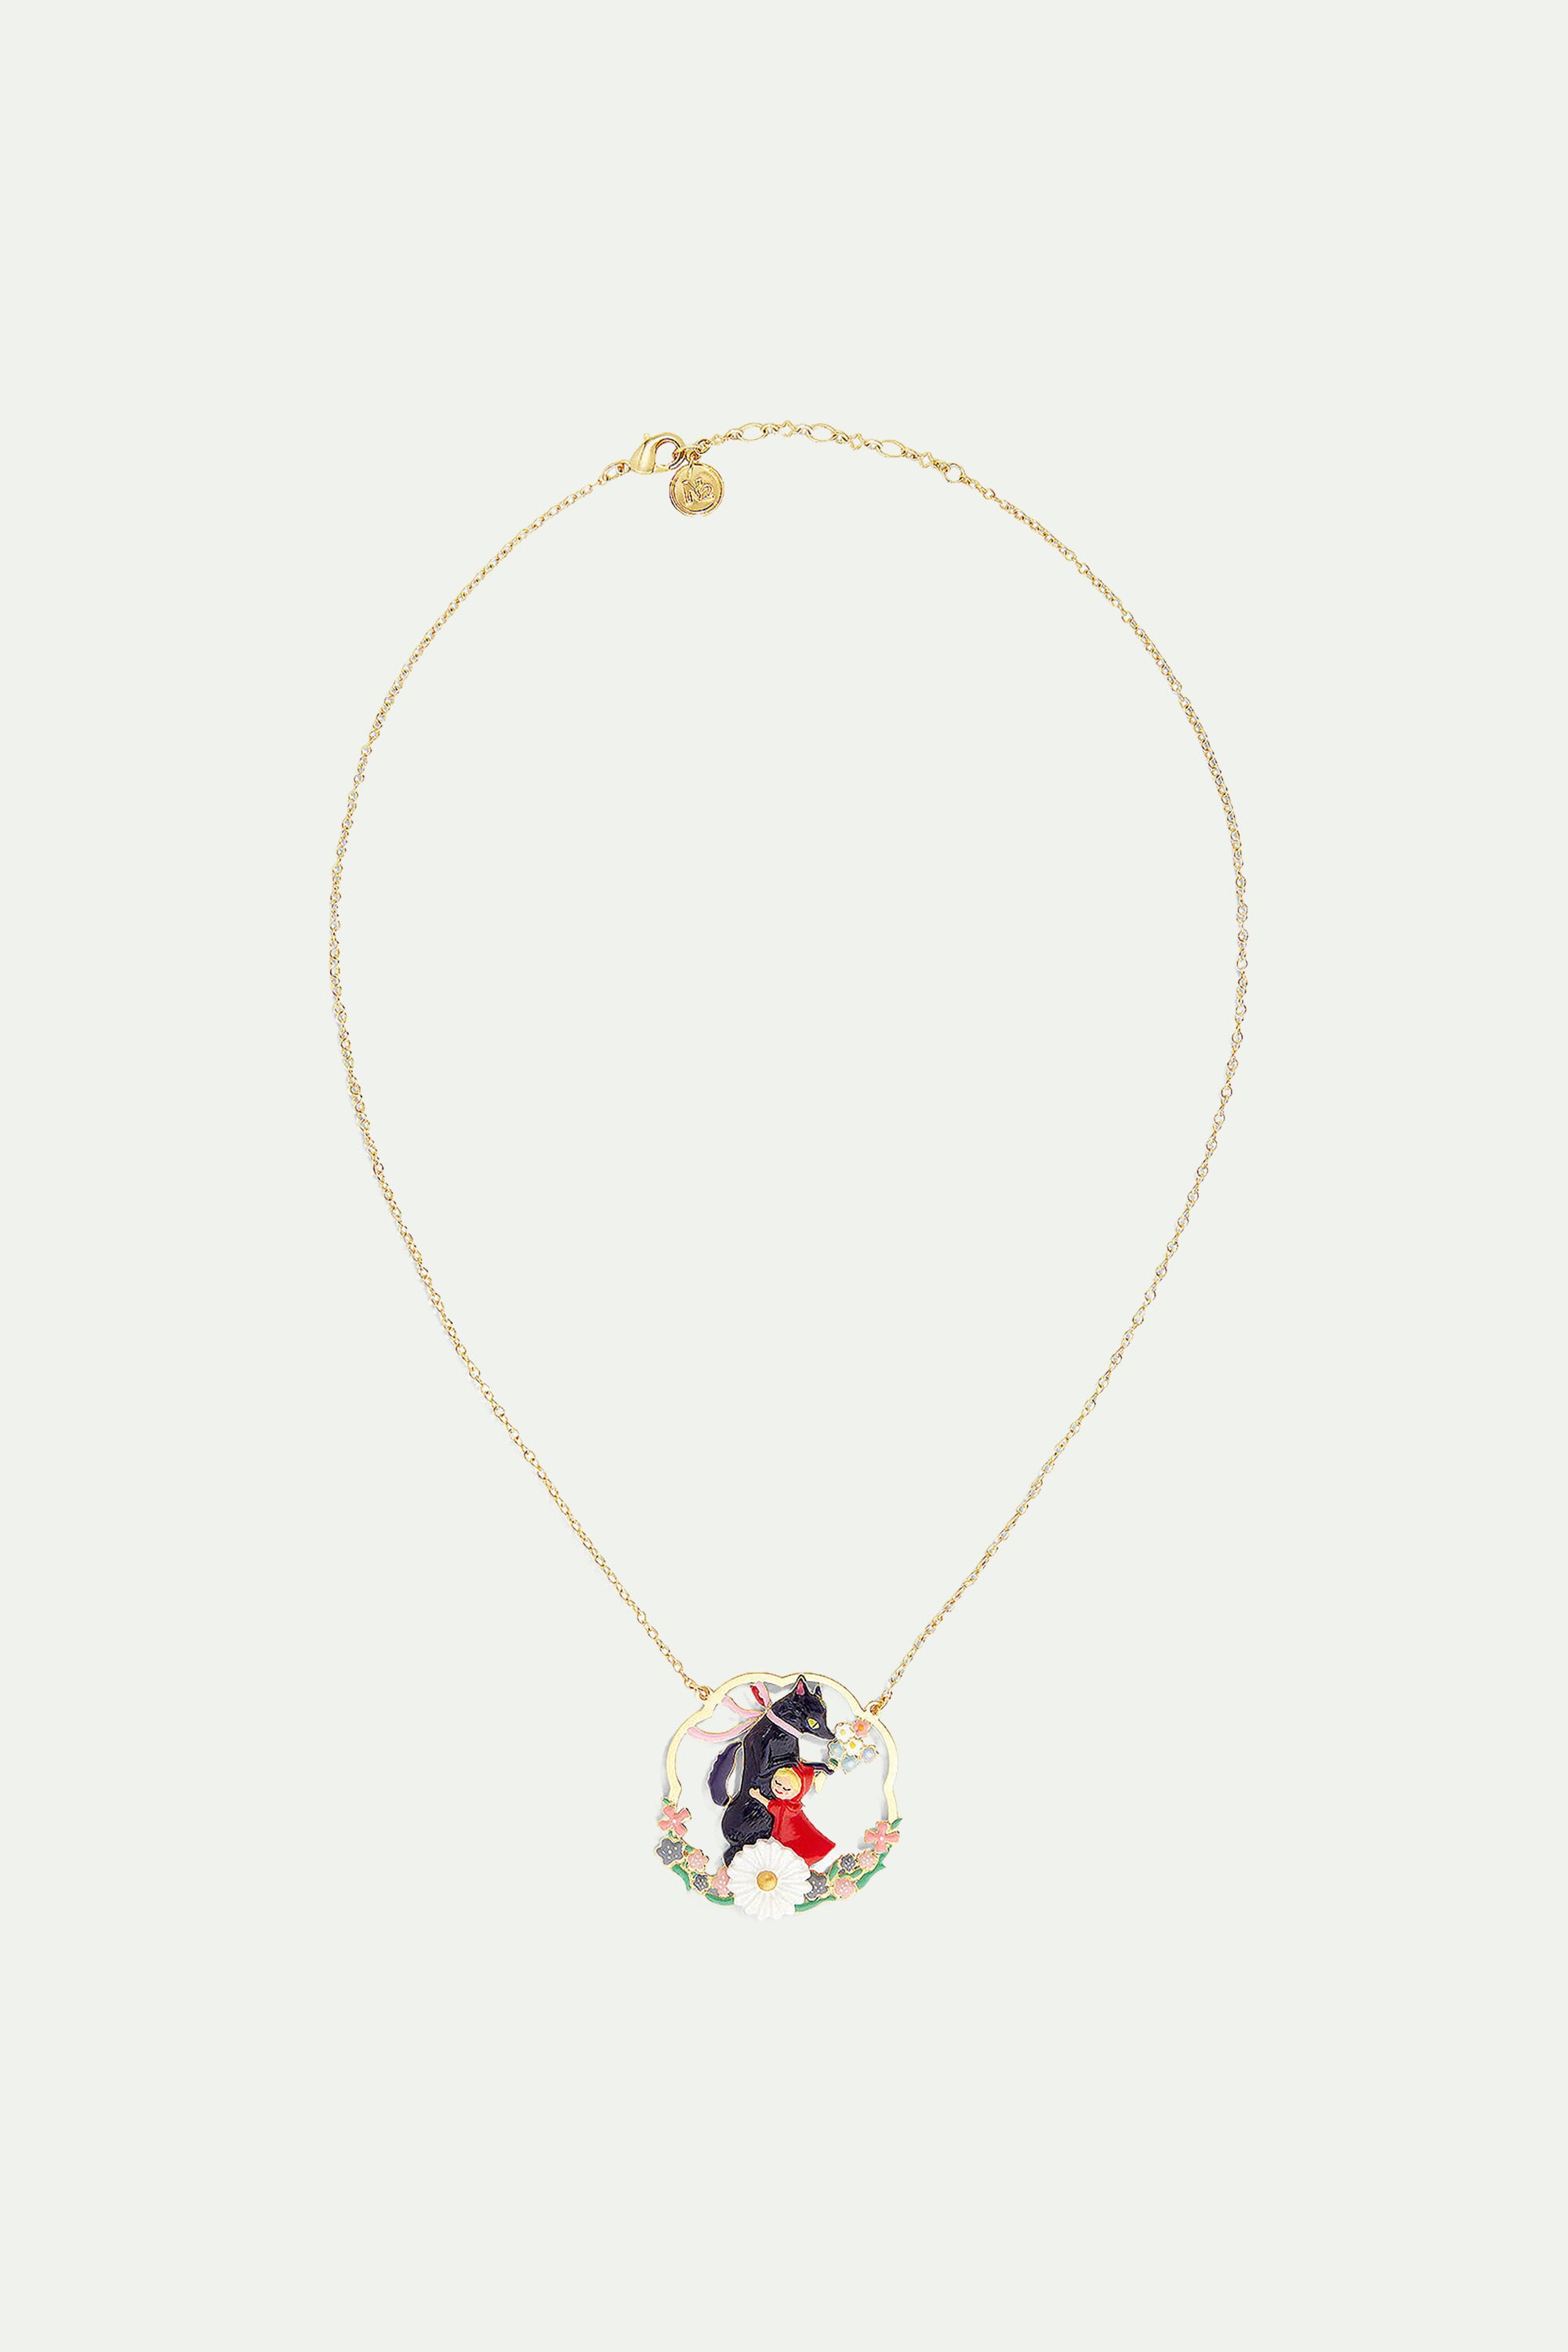 Big Bad Wolf and Little Red Riding Hood statement necklace